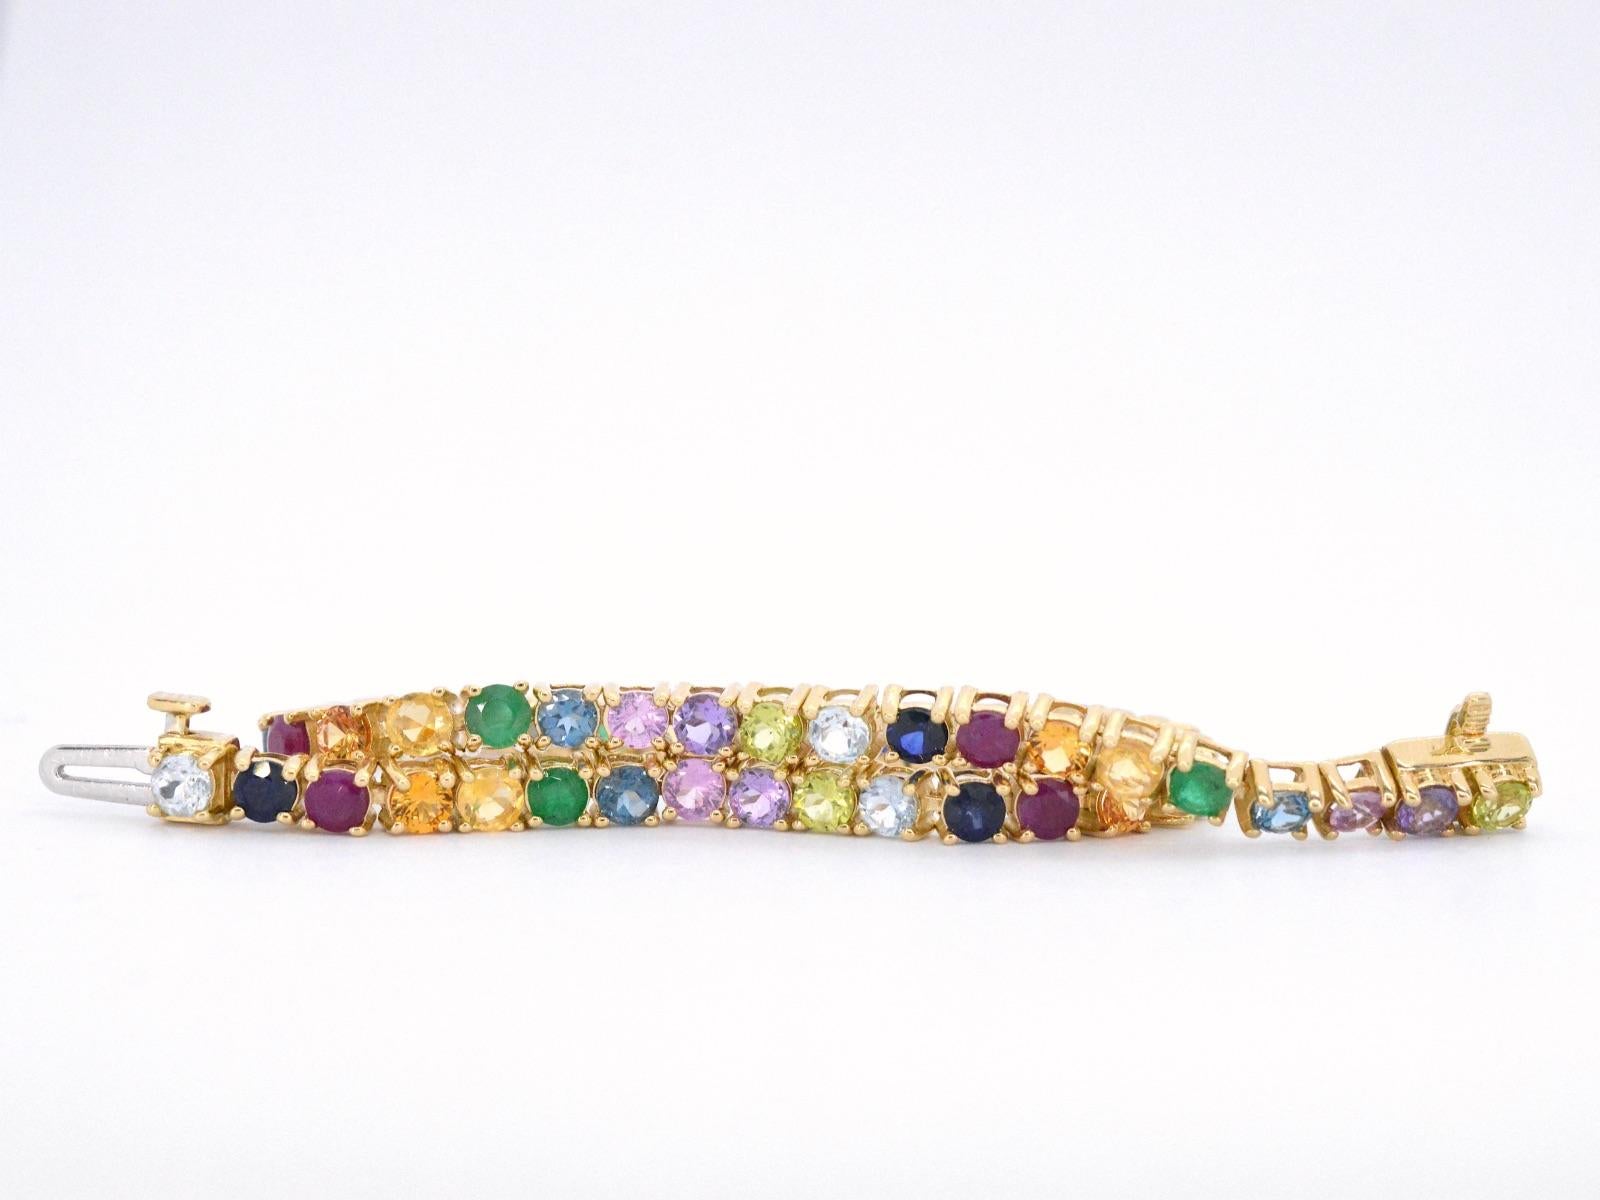 This is a beautiful bracelet that features natural gemstones cut in round facetted shapes. The bracelet is made of 14 karat gold and weighs 10.30 grams. It has a length of 18 cm and is hallmarked as such.

The gemstones used in this bracelet weigh a